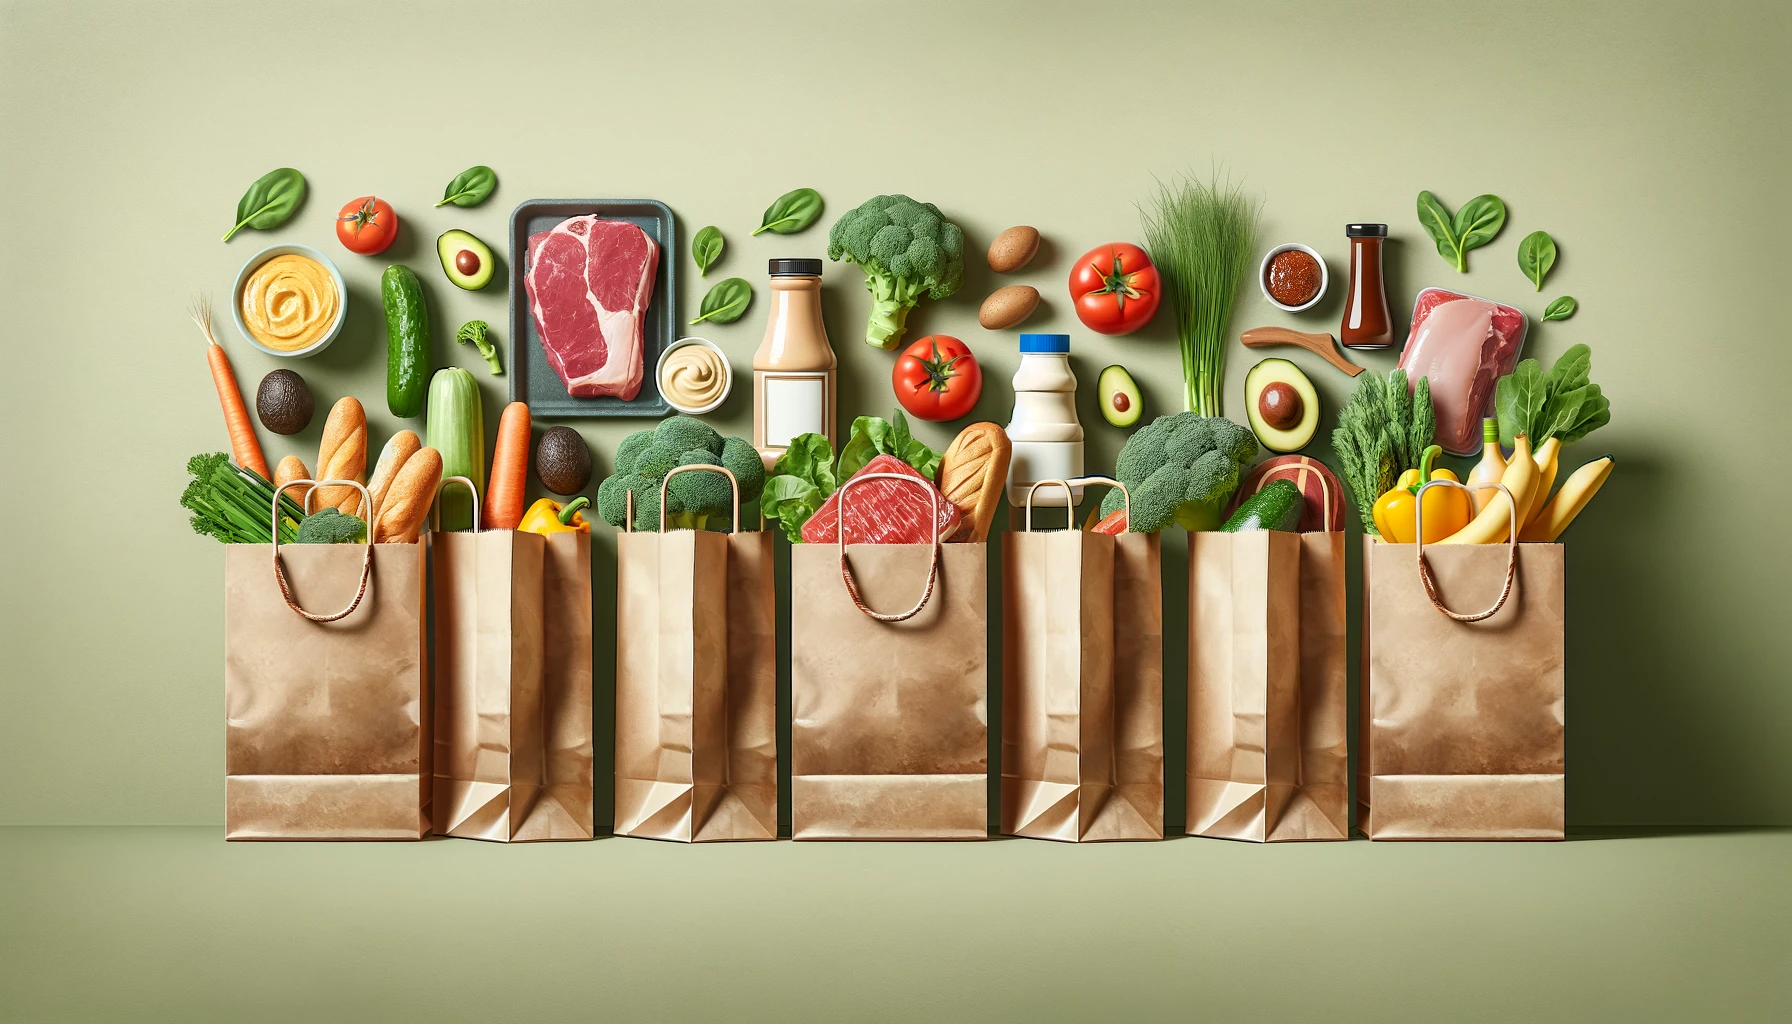 Grocery bags showcasing several healthy keto foods